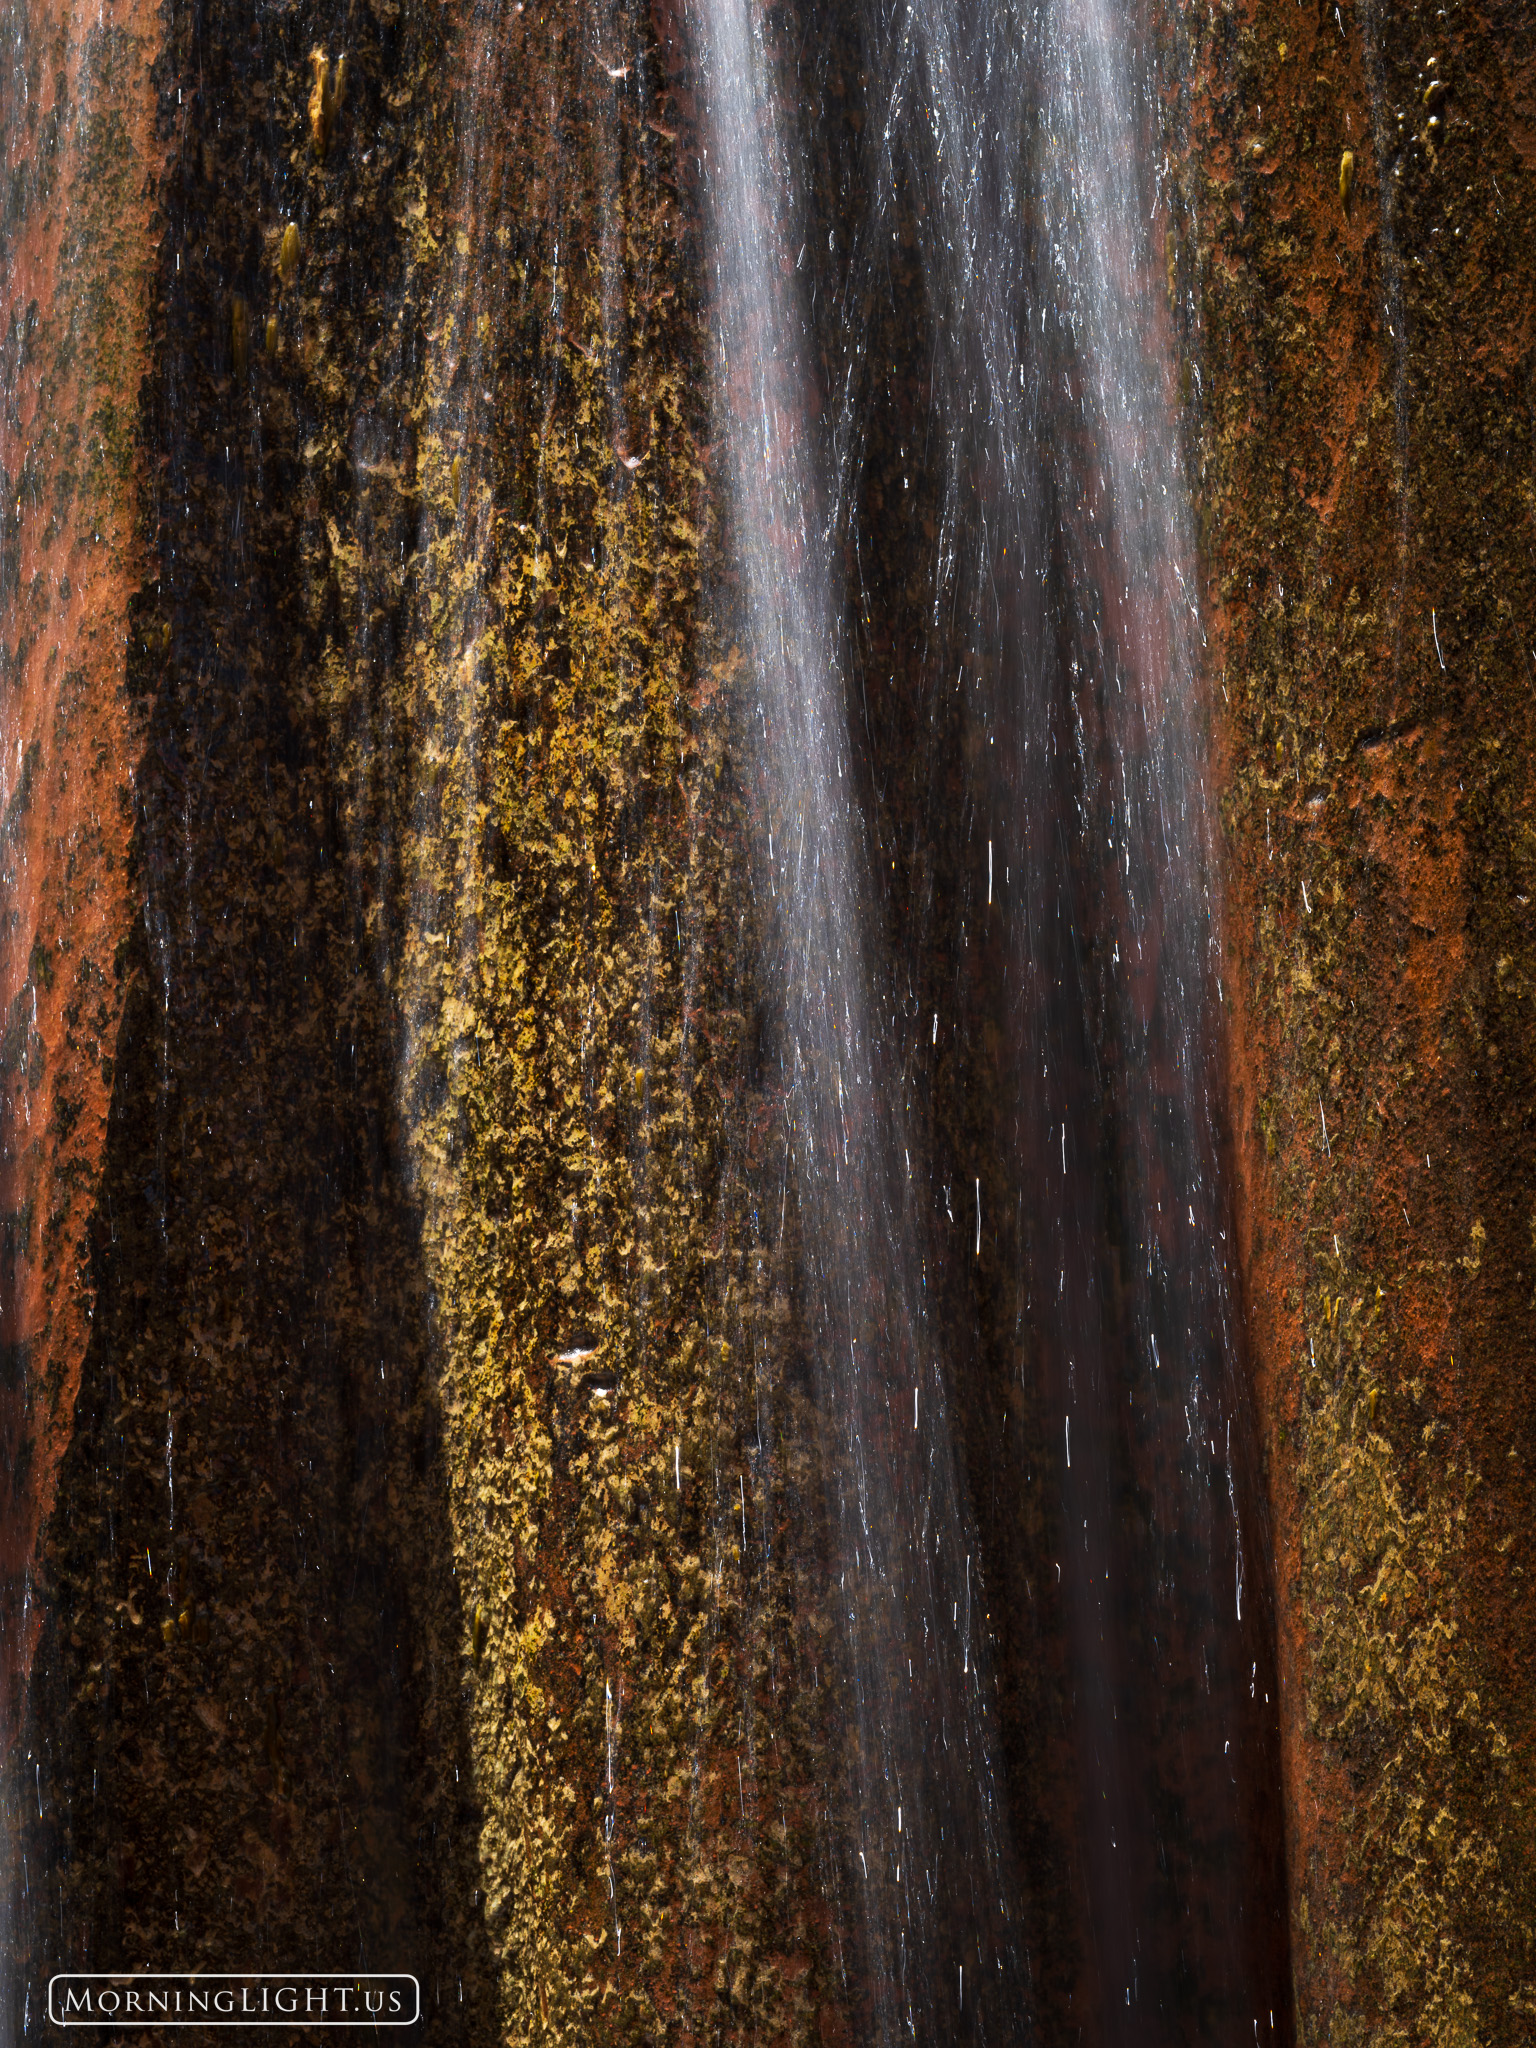 This is a closeup of a section of waterfall deep in a desert canyon.